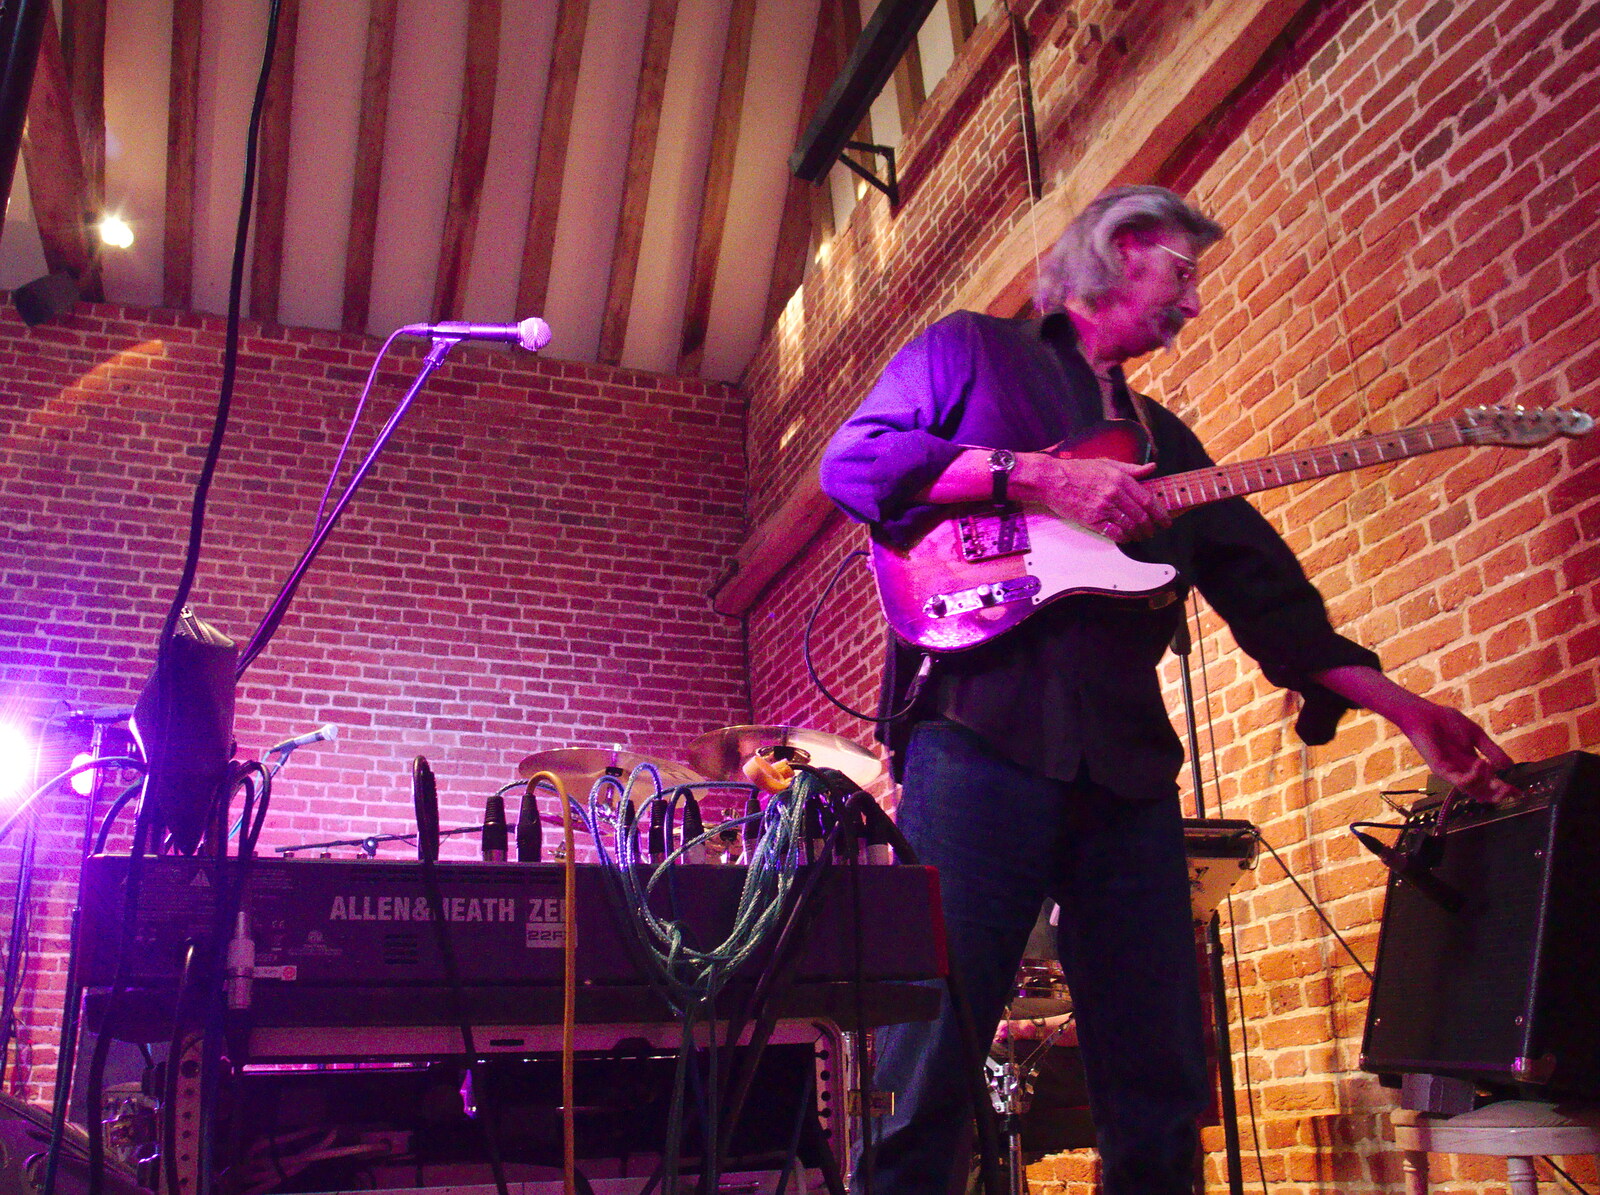 Rob tests his guitar out from The BBs Play Haughley Park Barn, Haughley, Suffolk - 26th April 2014